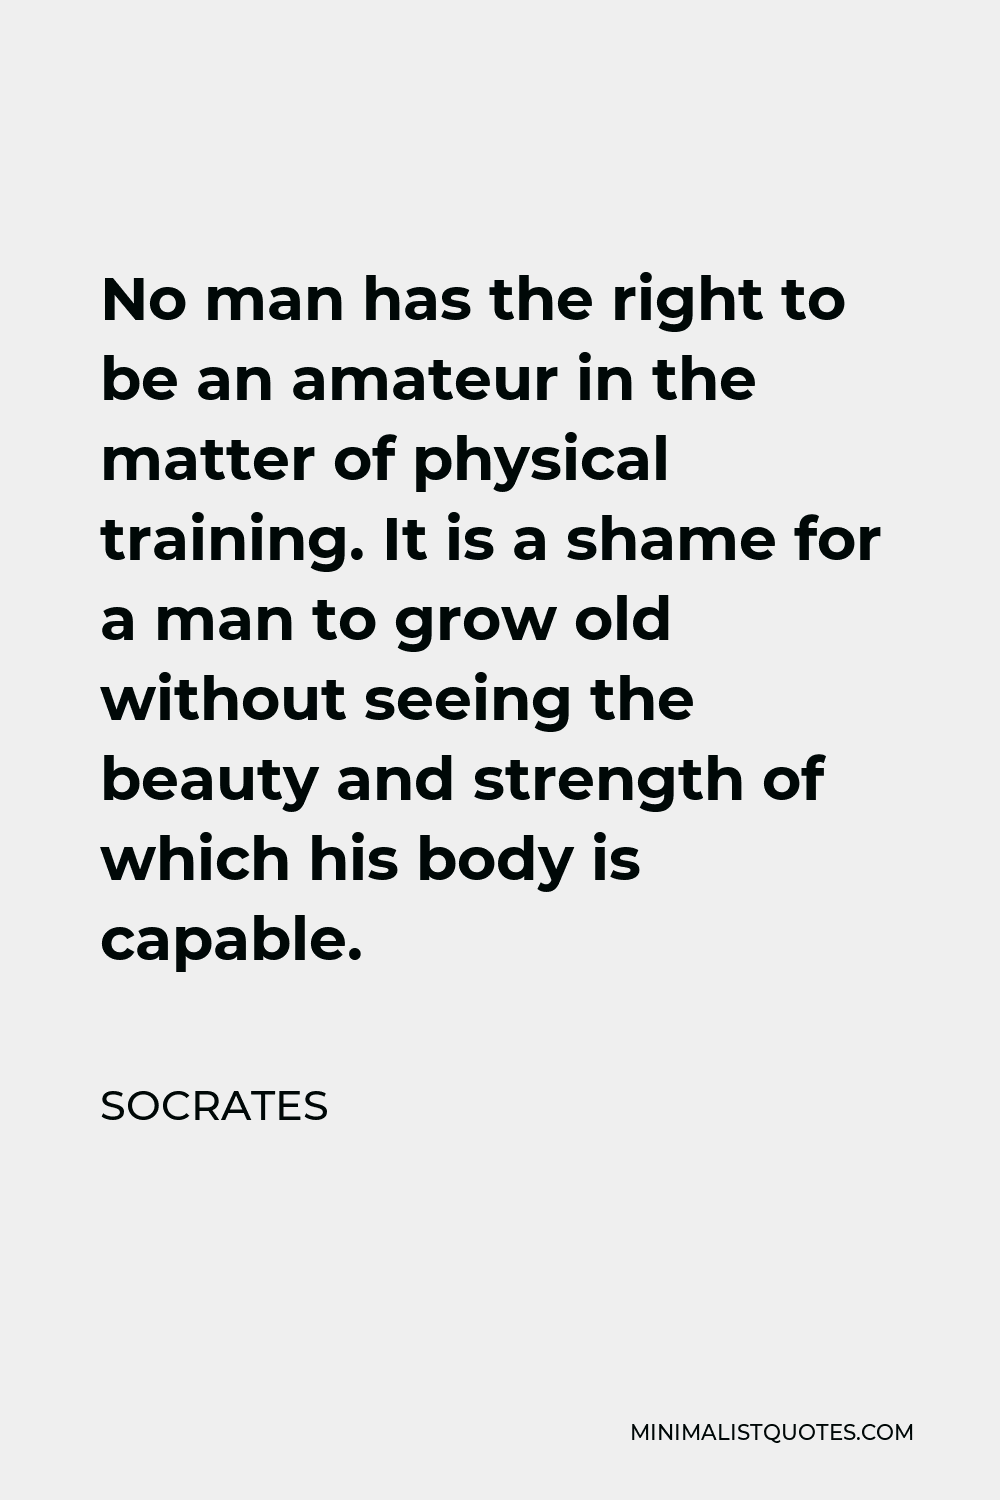 Socrates Quote - No man has the right to be an amateur in the matter of physical training. It is a shame for a man to grow old without seeing the beauty and strength of which his body is capable.